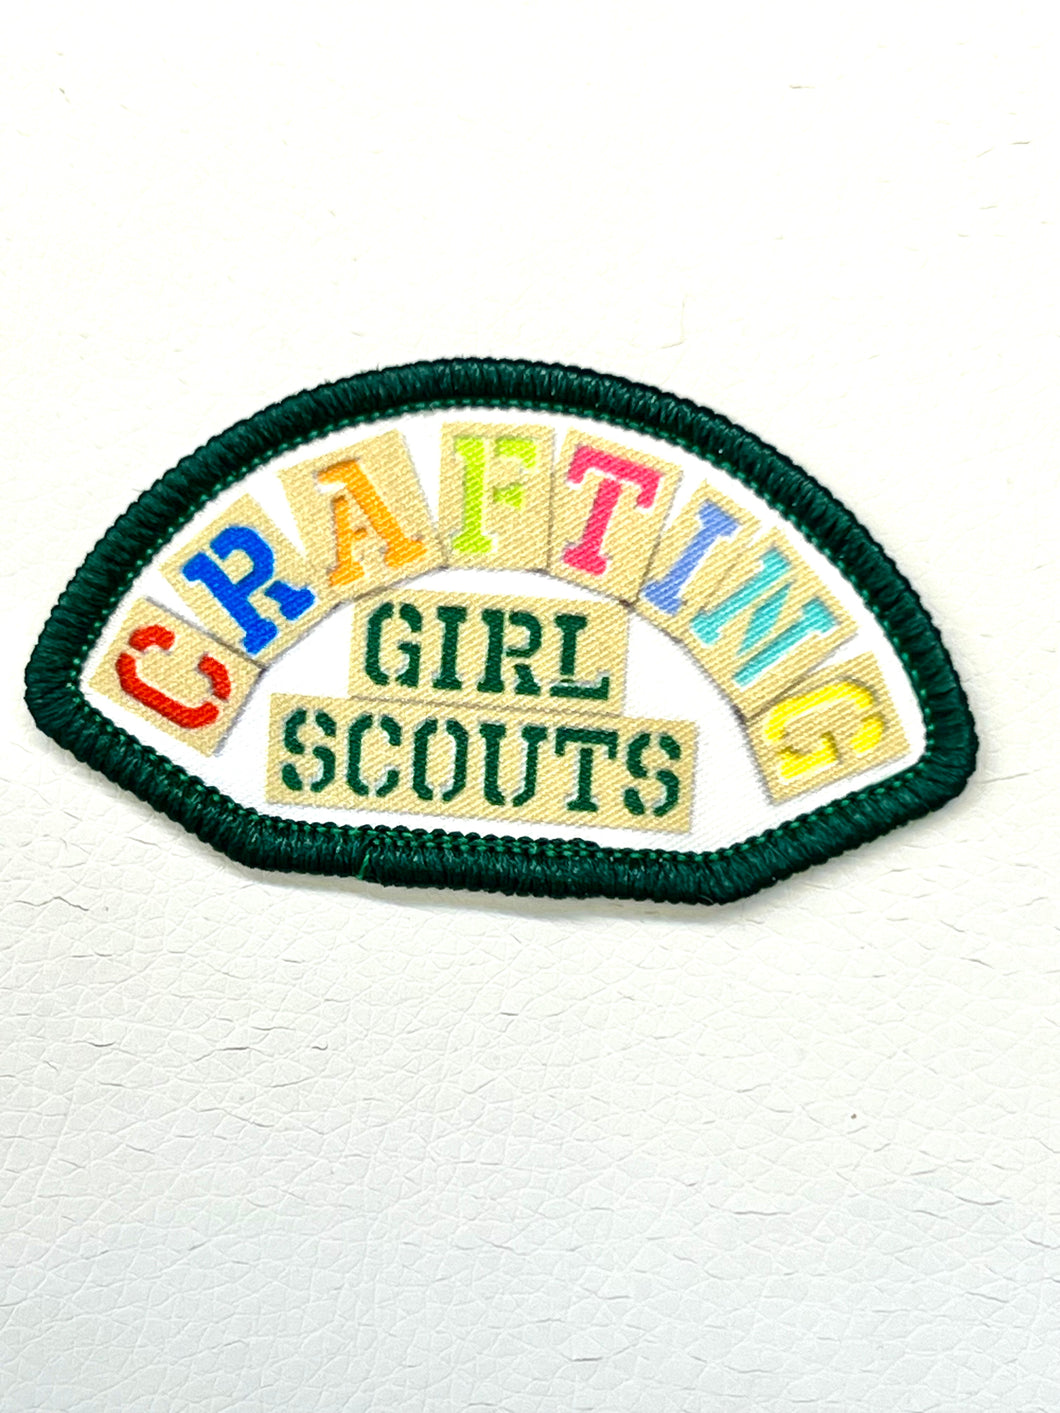 Girl Scouts craft patch